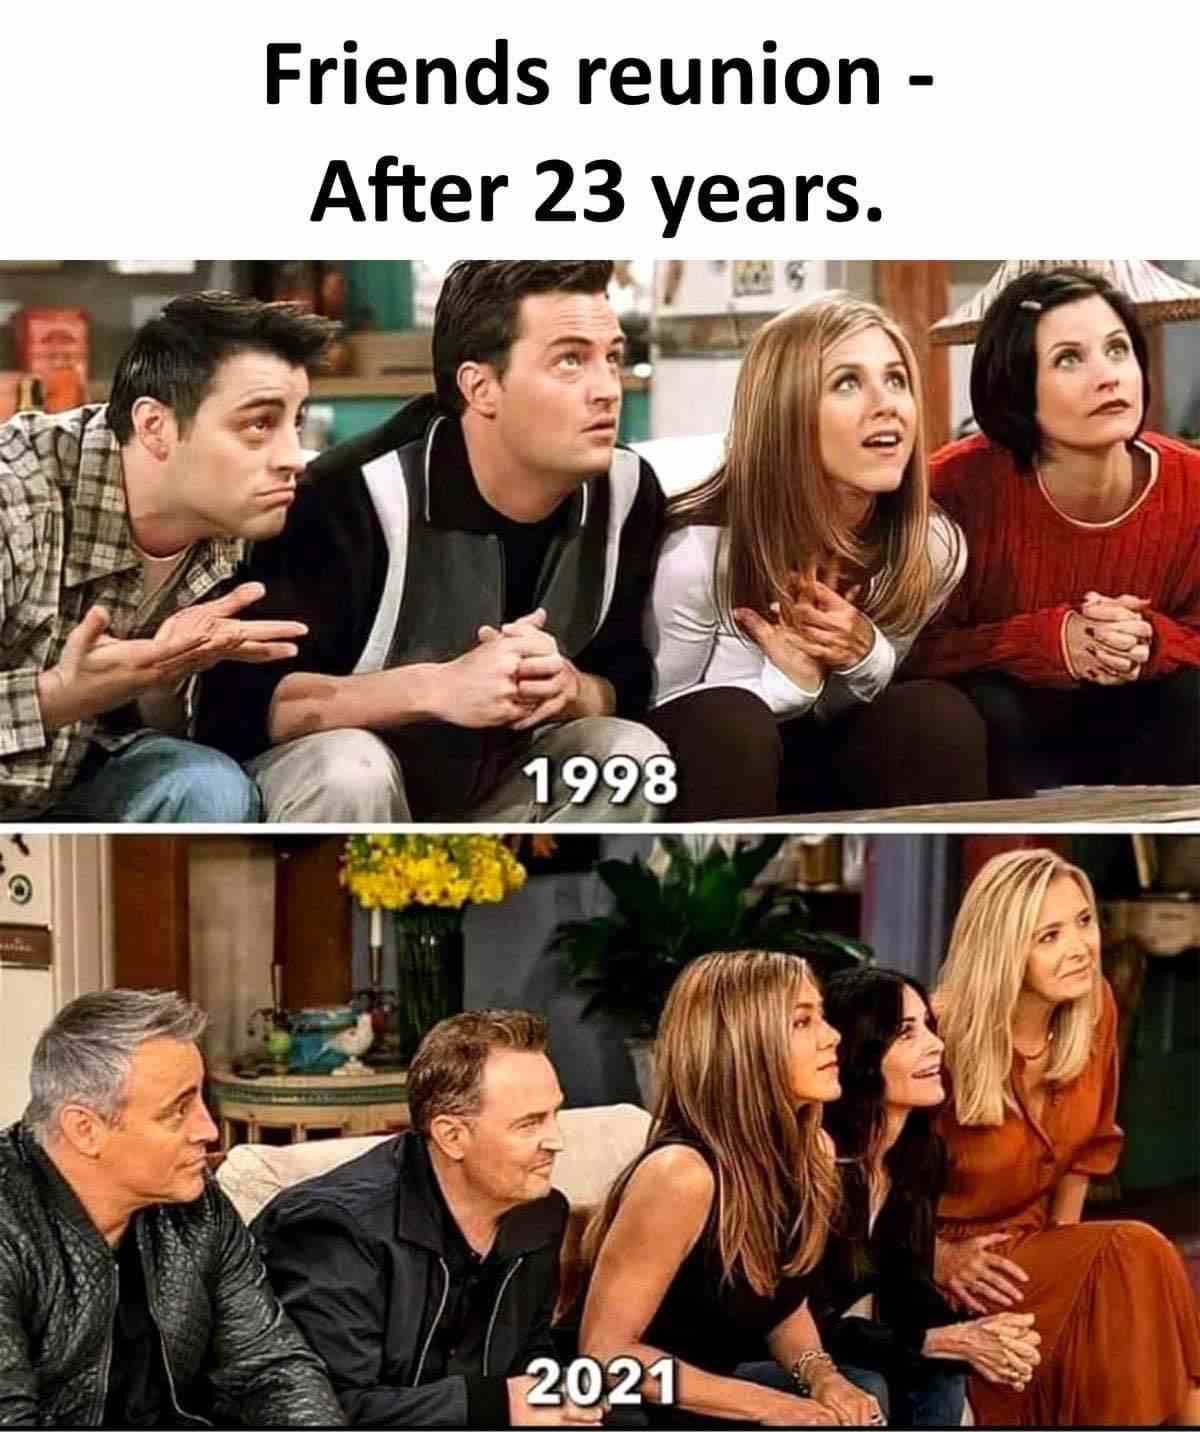 Friends reunion After 23 years